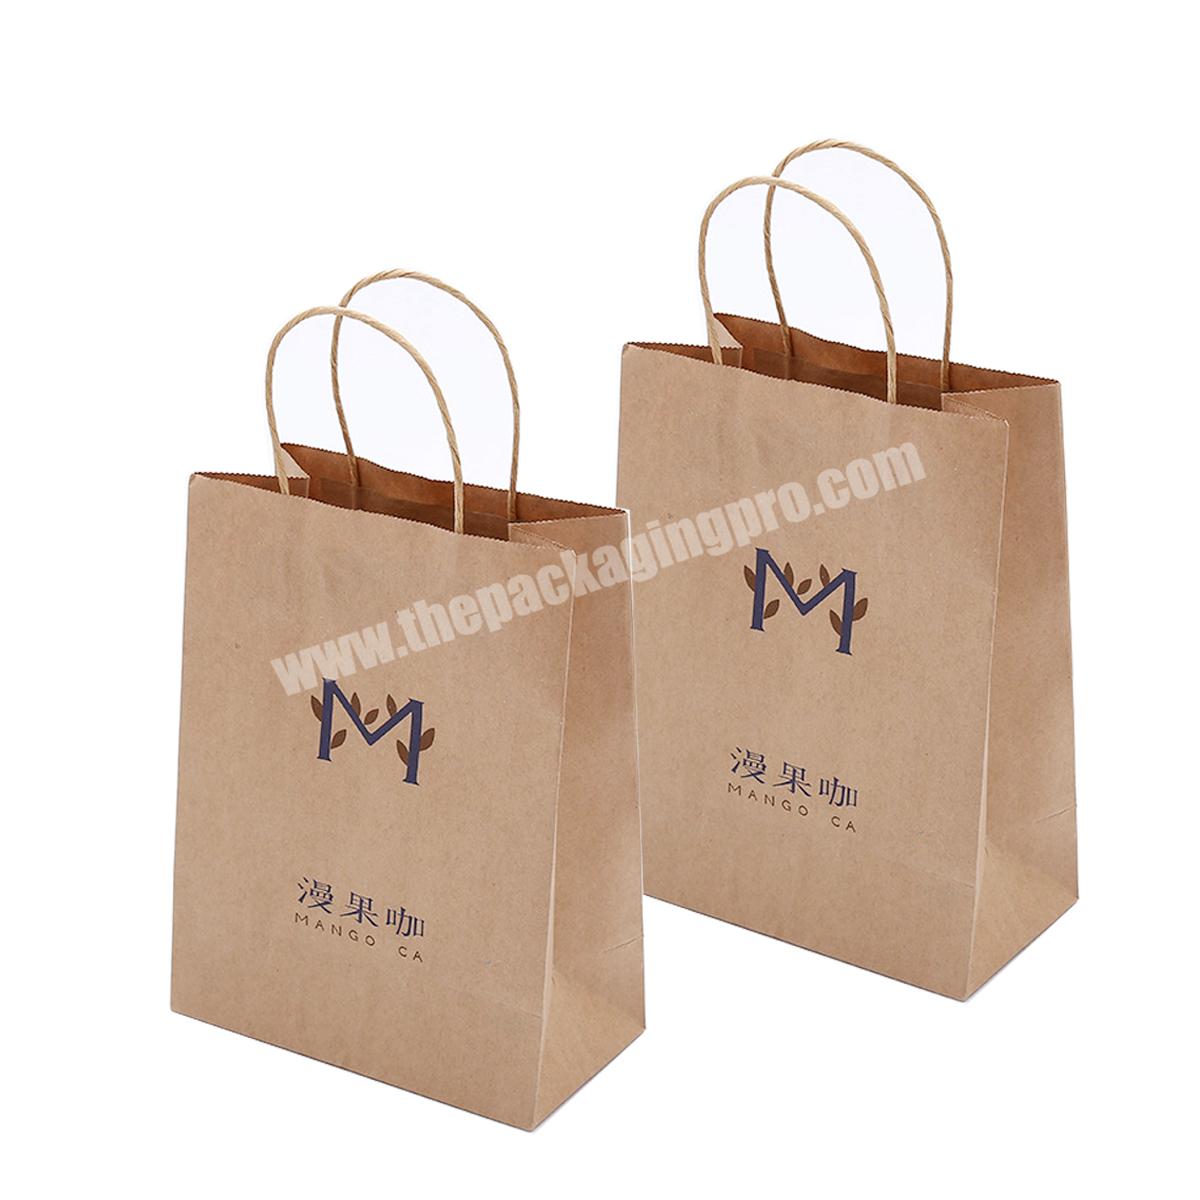 Medium Thank You Gift Bags Bulk with Handle Brown Kraft Paper Bags for Retail Shopping Wedding Goodies Merchandise for Customers